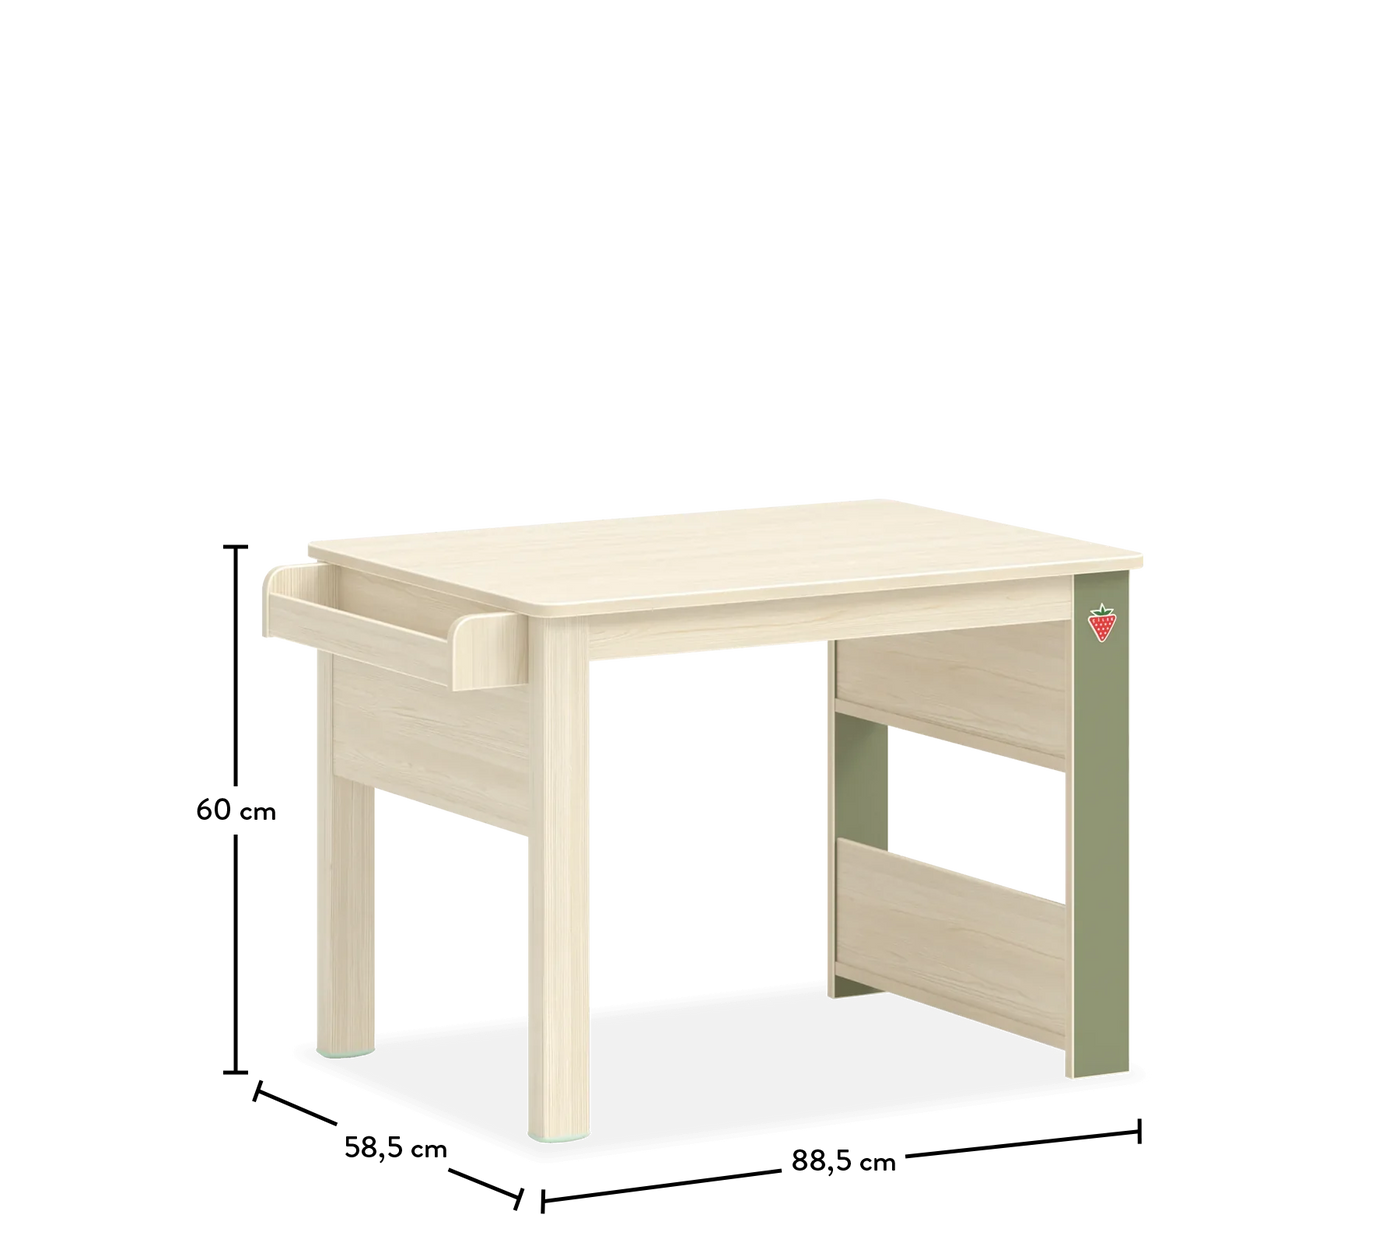 Montes Natural Play Desk